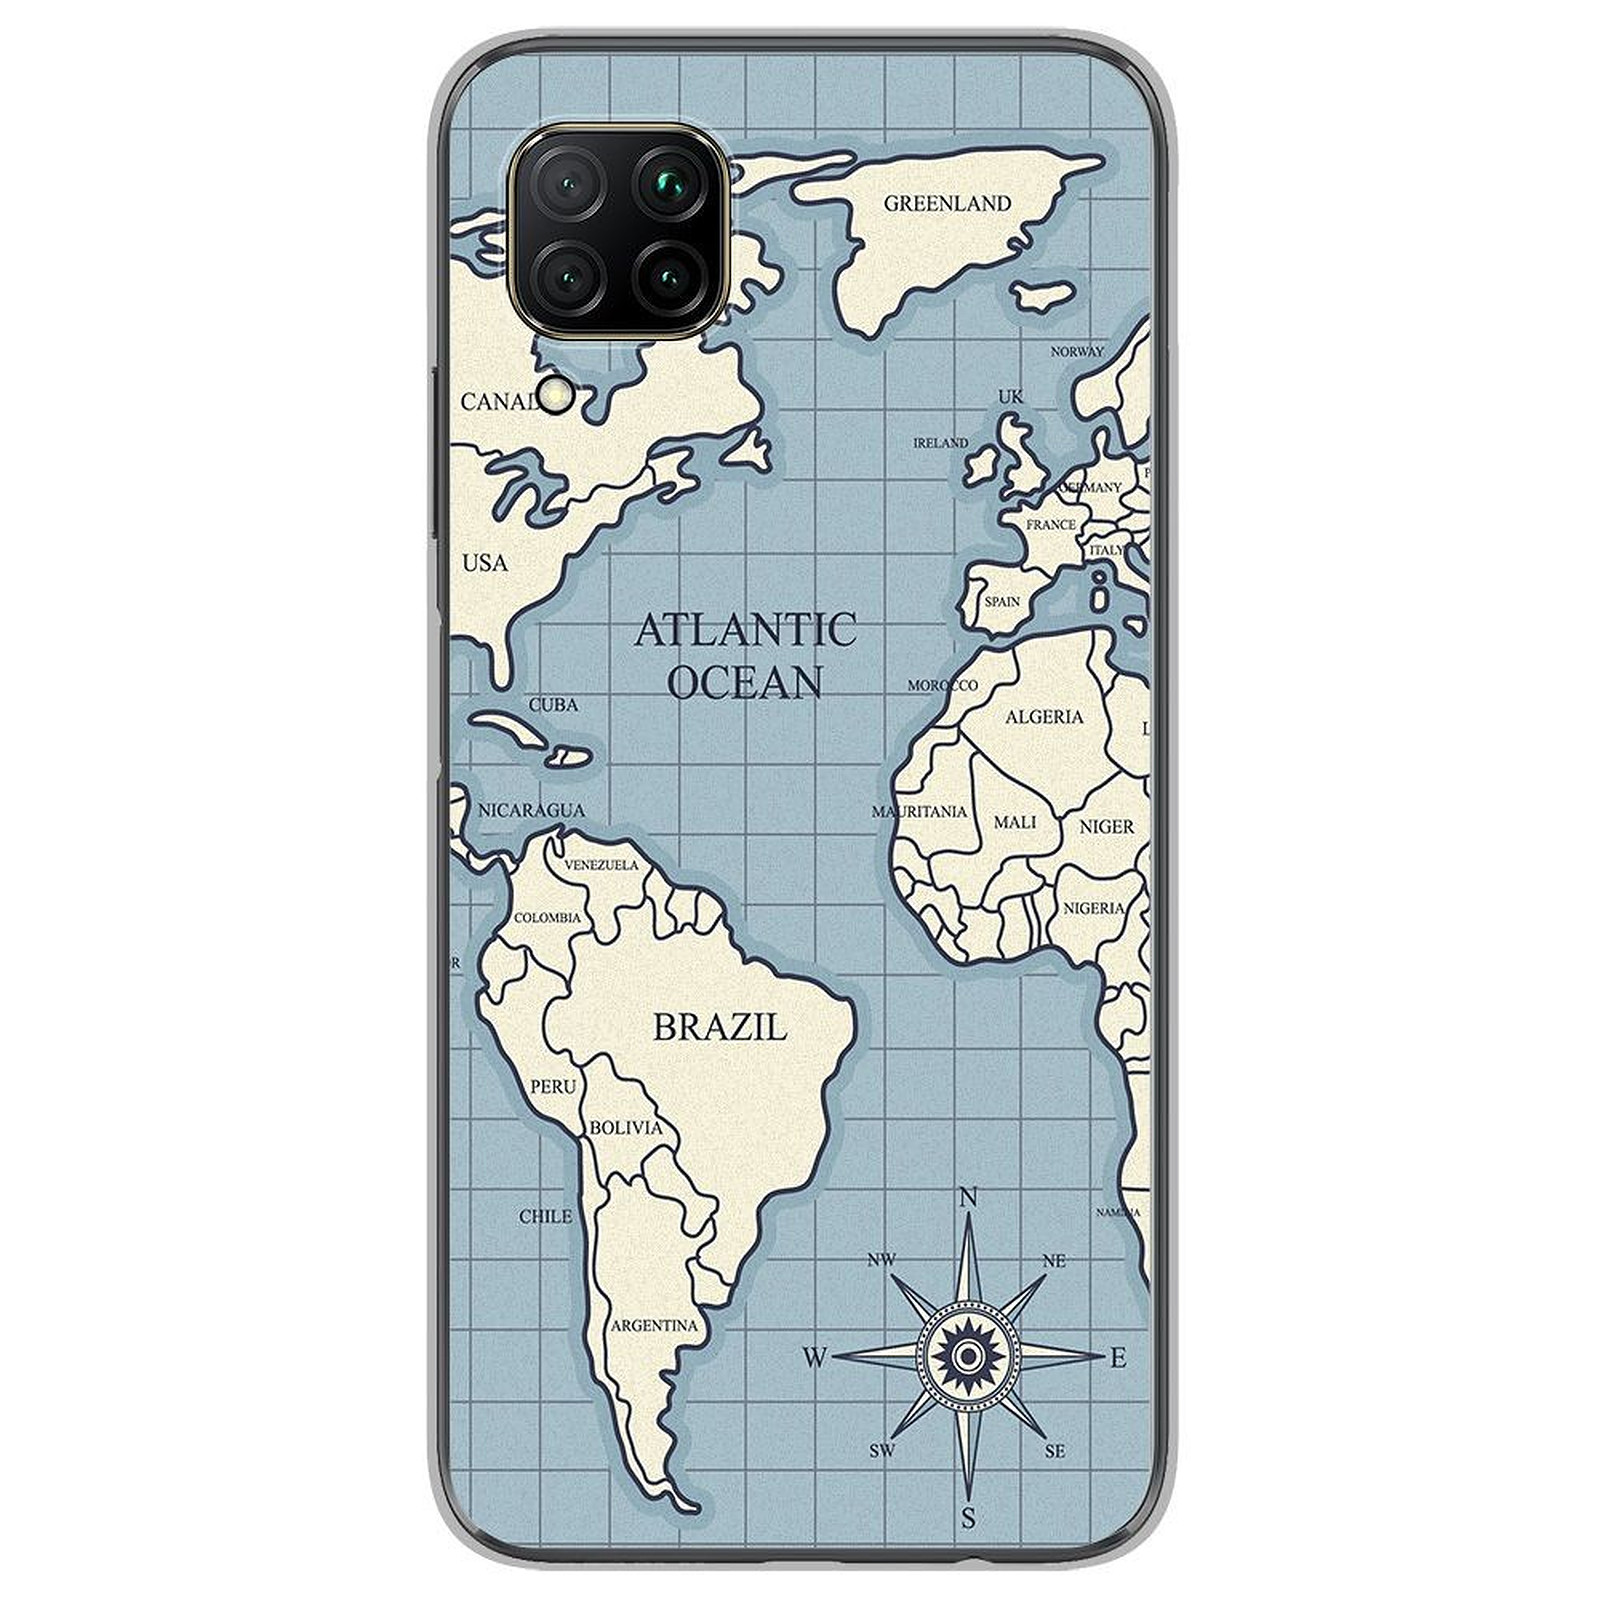 1001 Coques Coque silicone gel Huawei P40 Lite motif Map vintage - Coque telephone 1001Coques